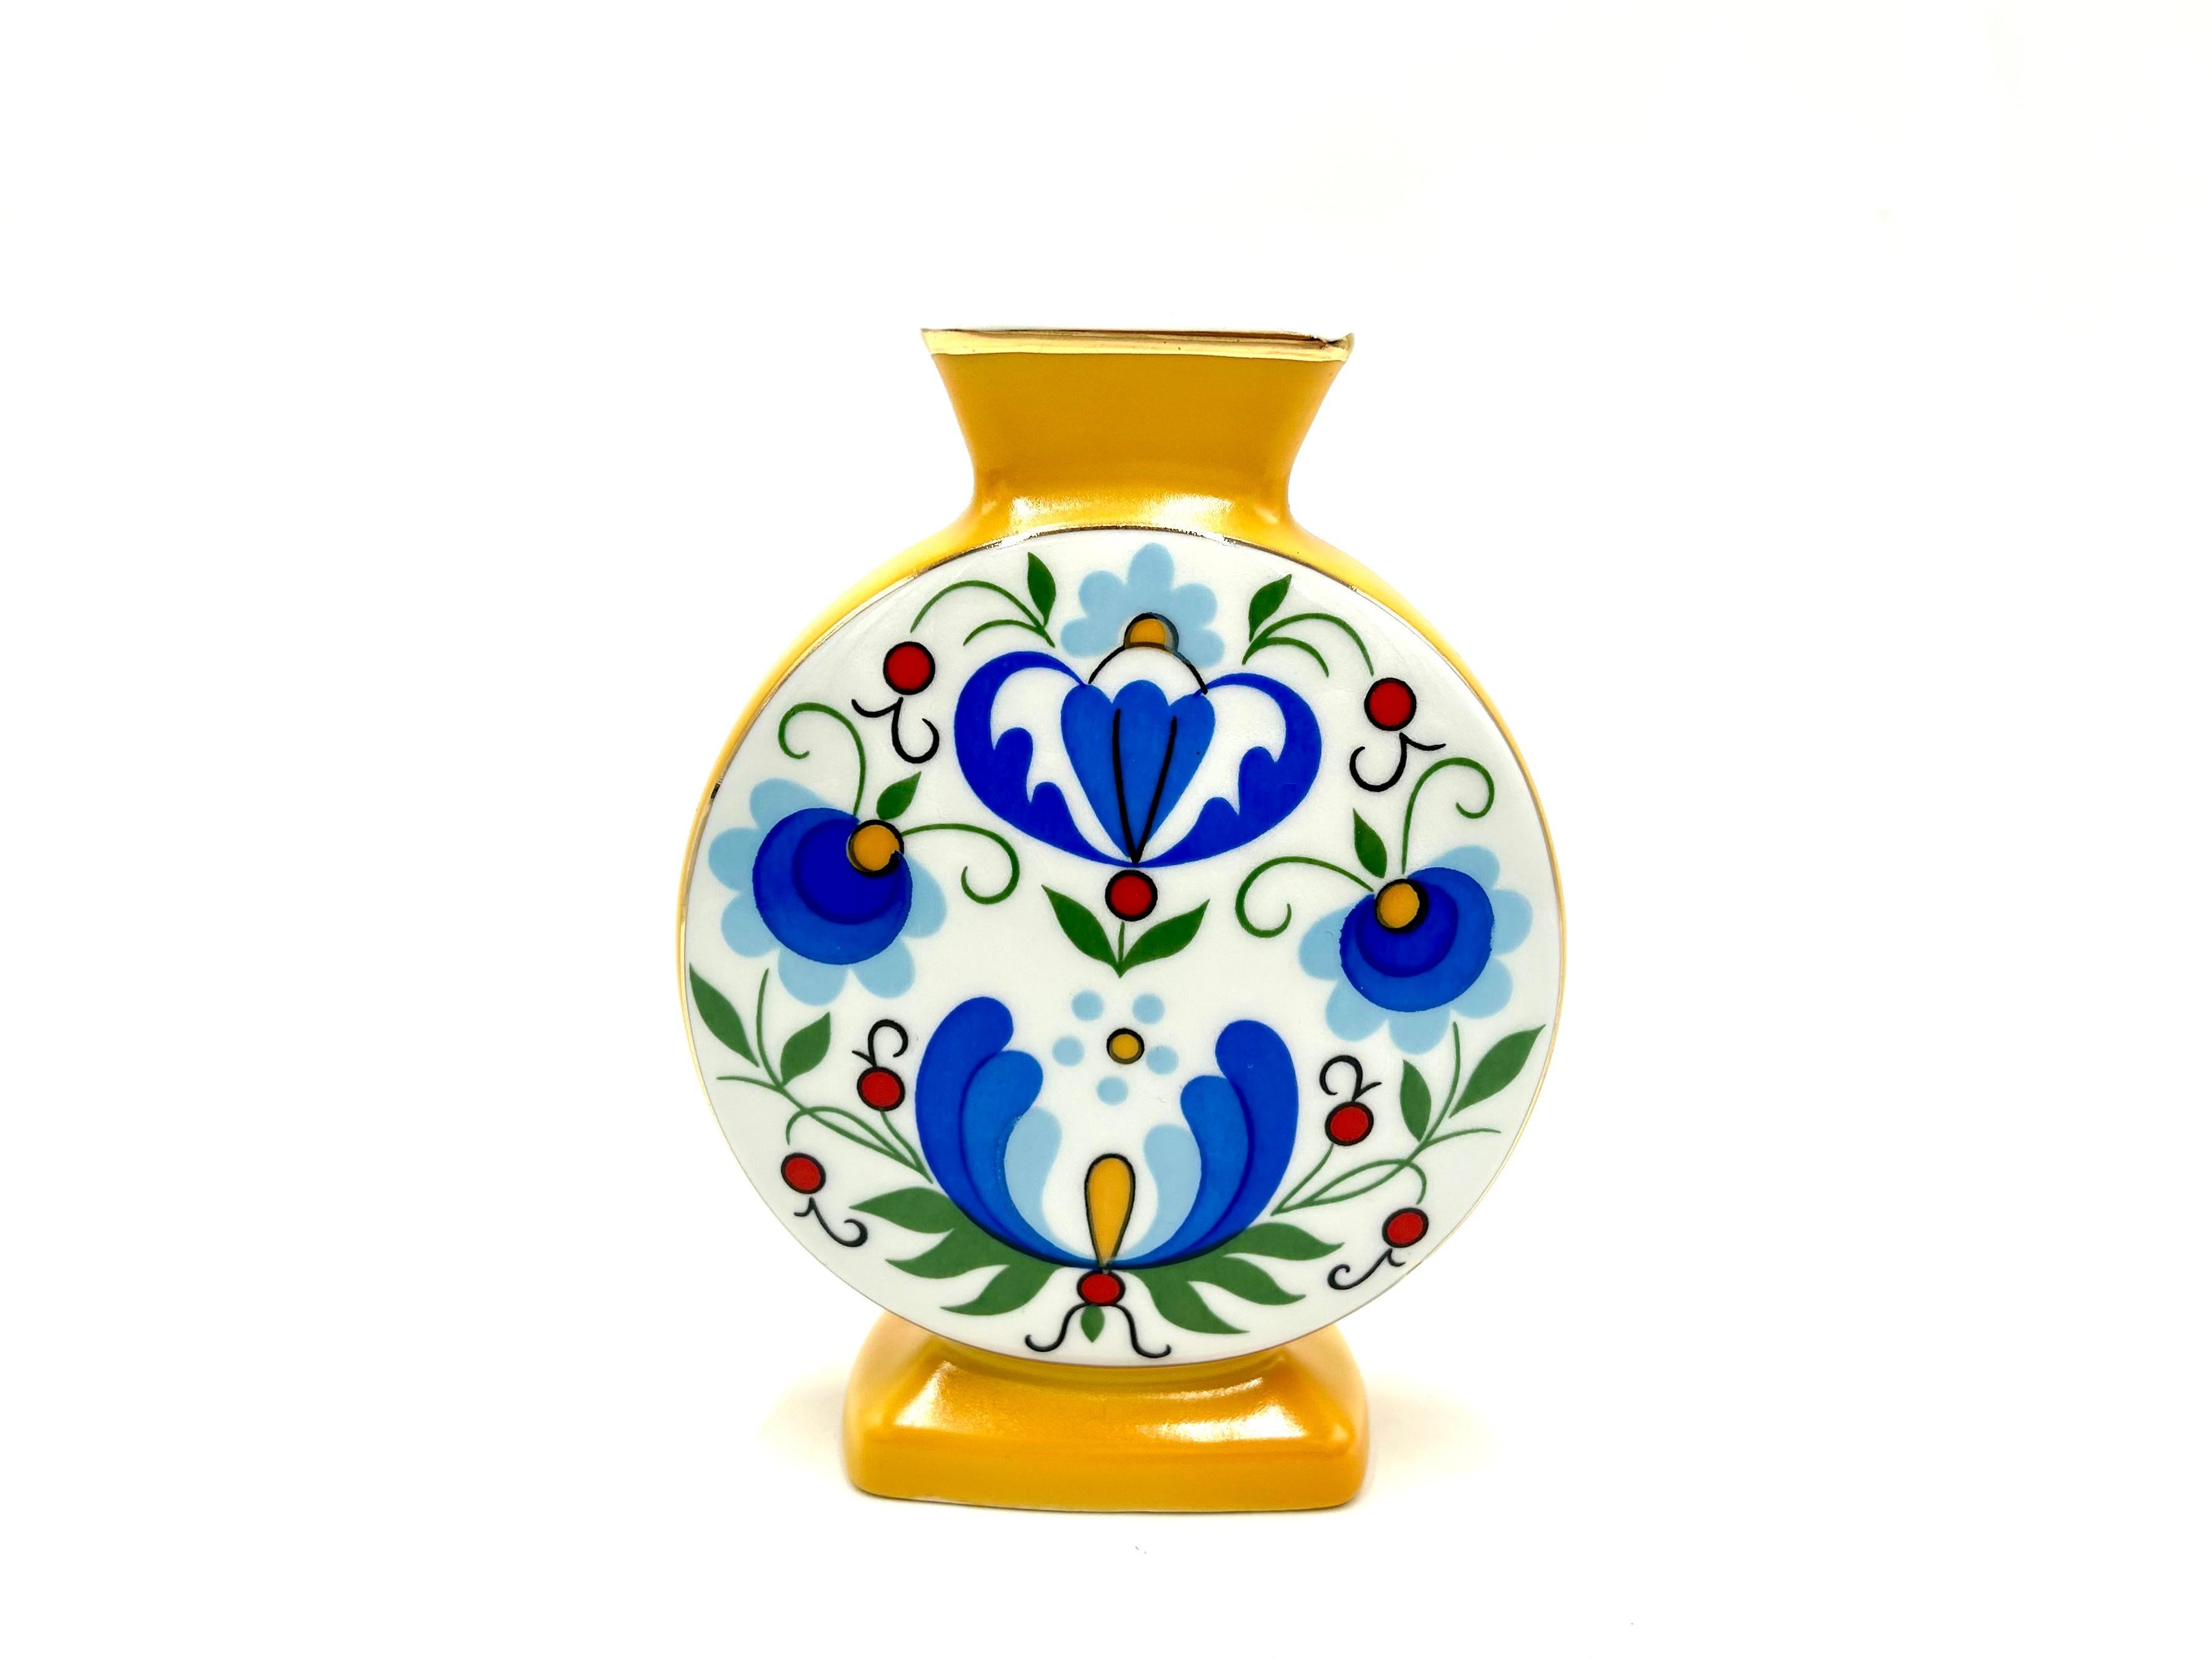 A small vase with folk patterns

Produced in Poland by Zaklady Porcelany Stolowej Lubiana

Very good condition without damage

Measures: height 16cm width 12cm depth 4cm.